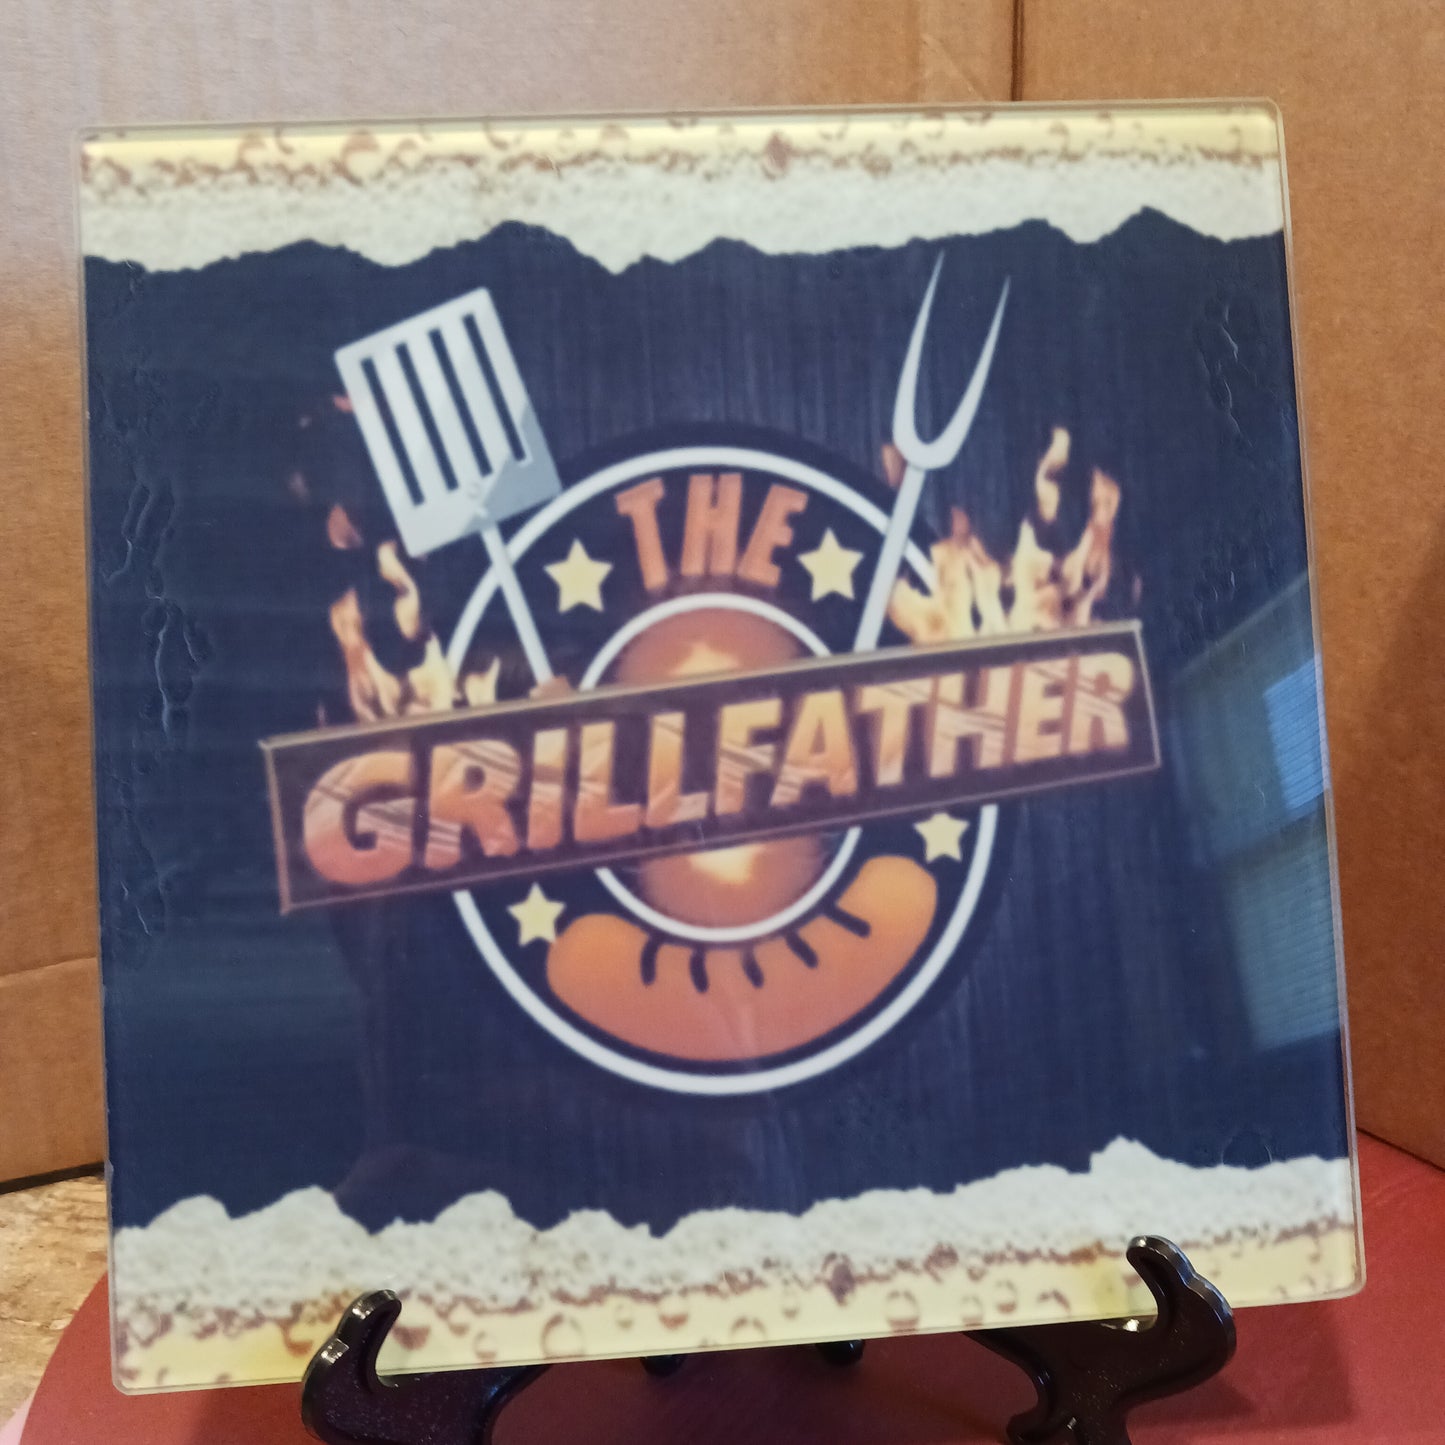 The grill father